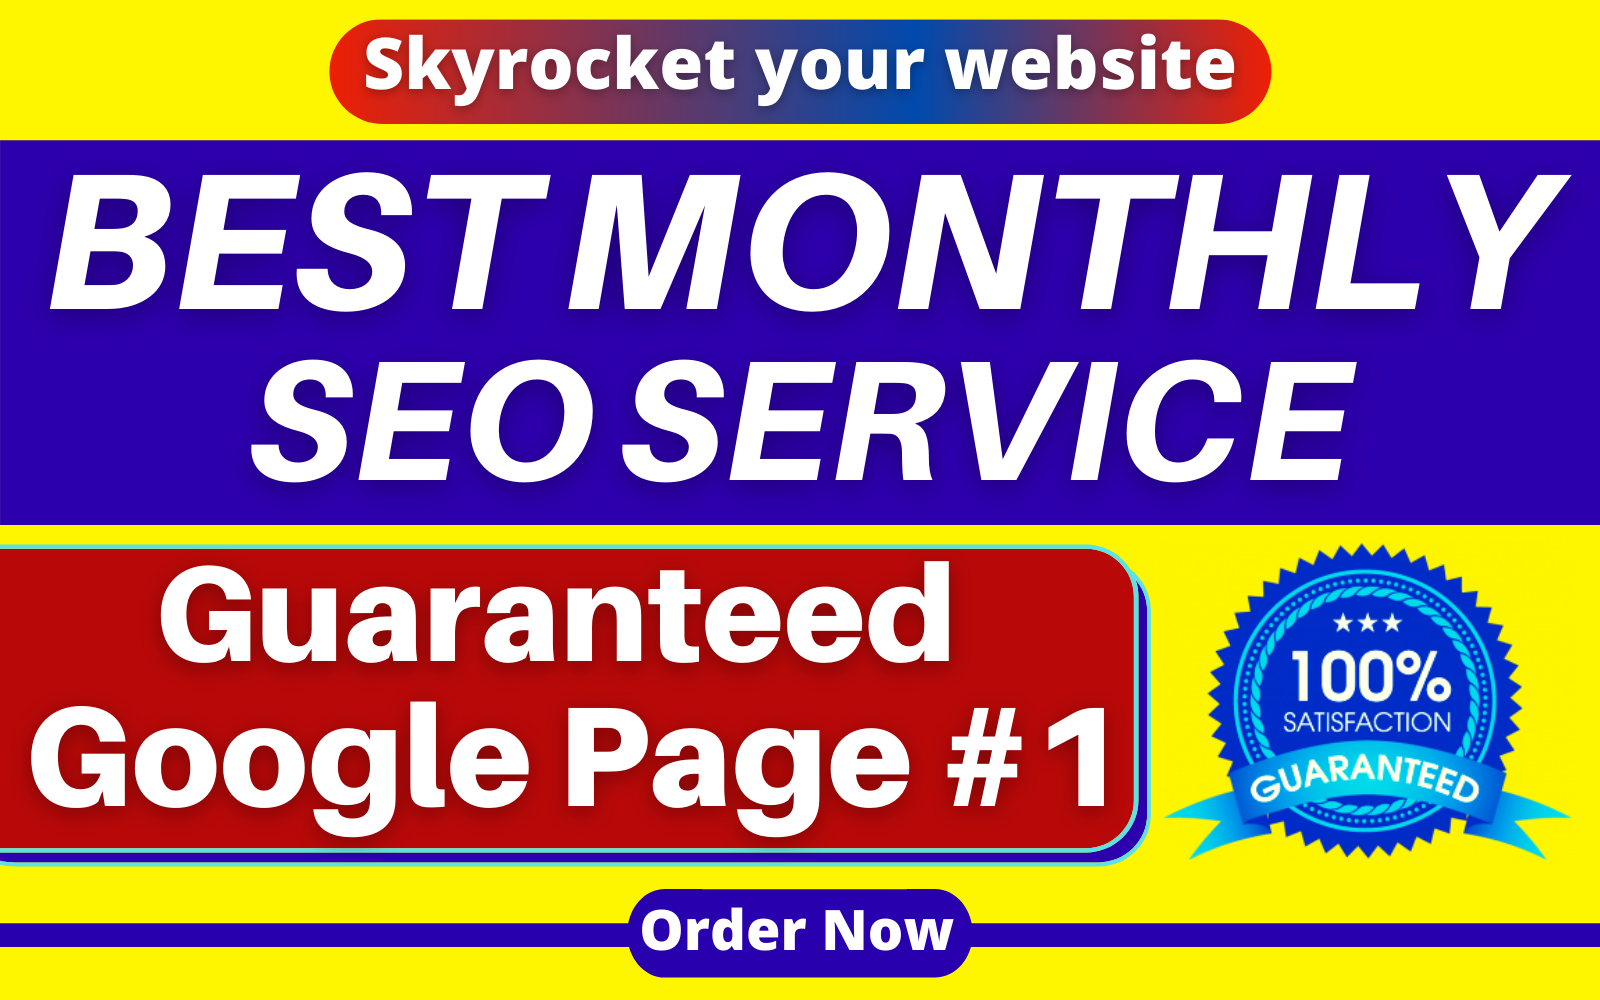 We Provide Best Monthly SEO Service With High Quality Backlinks Boost Google Ranking Guaranteed